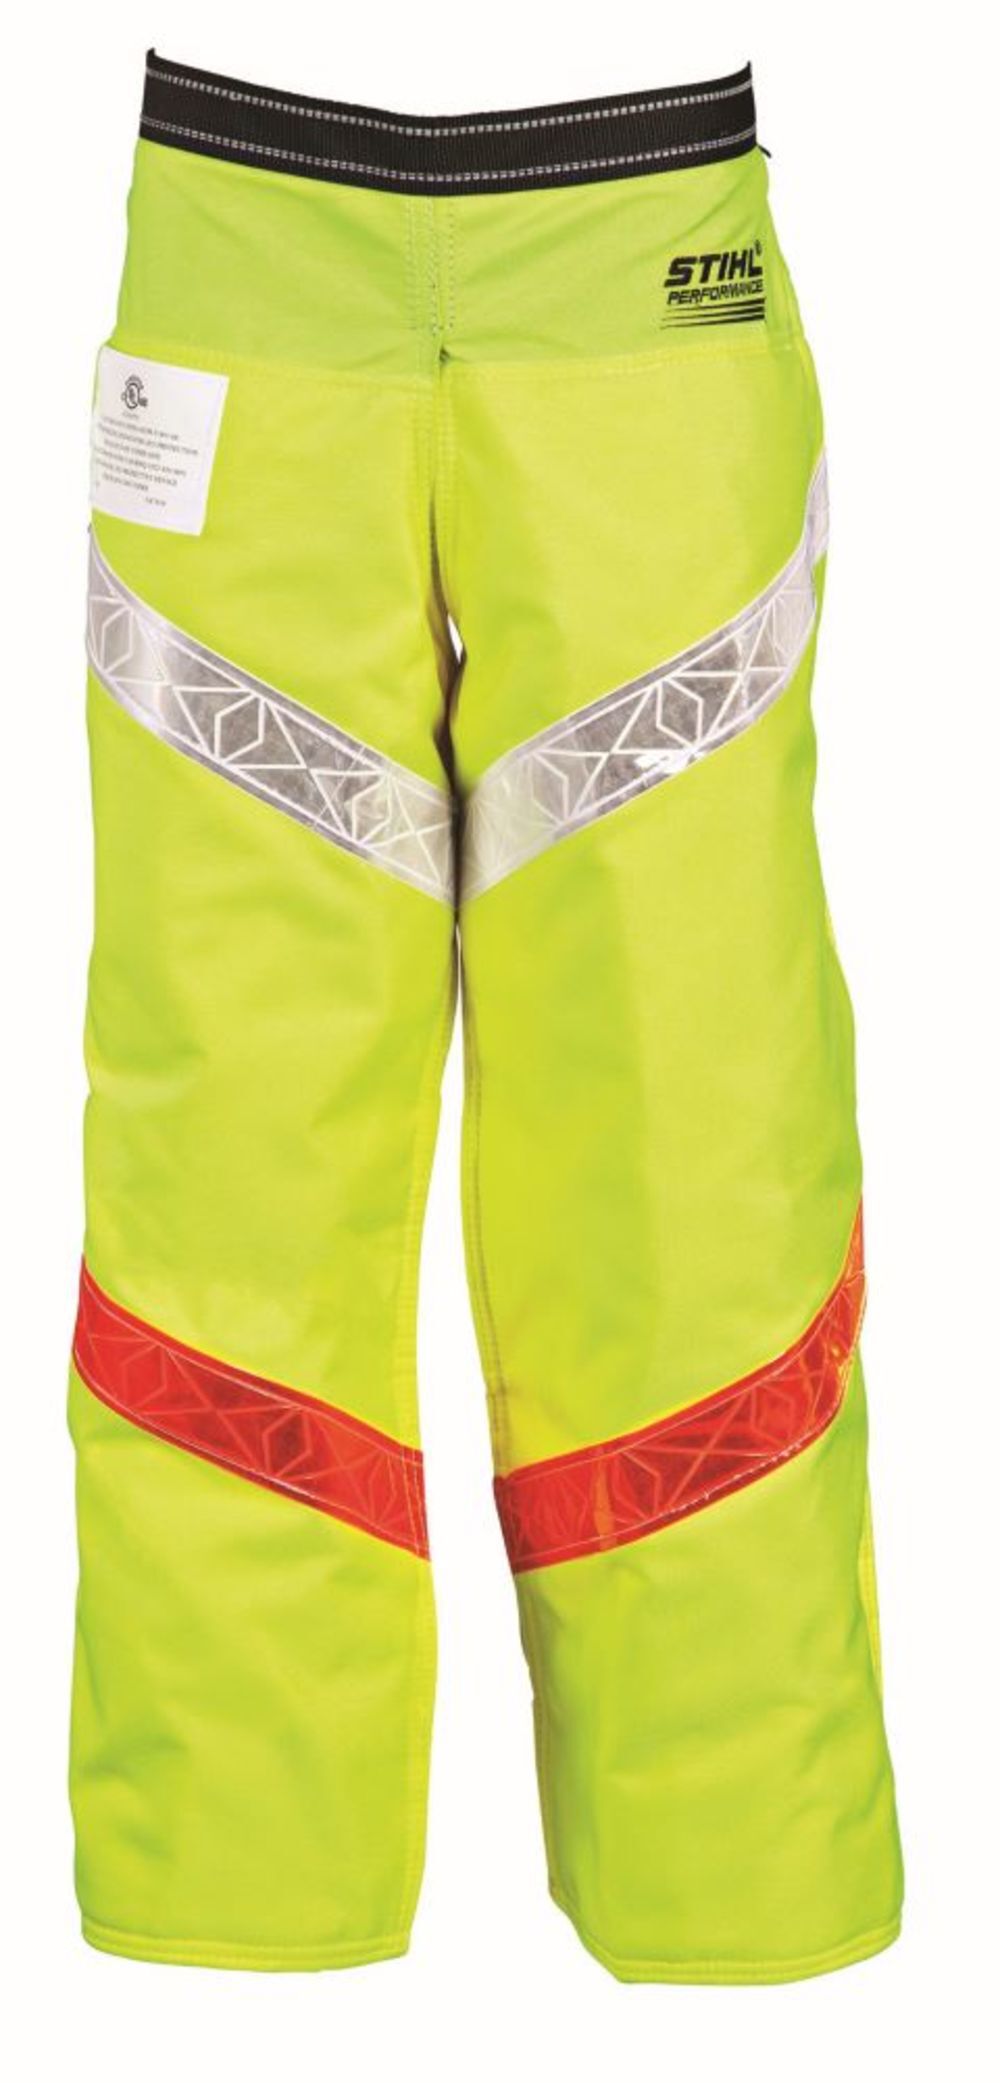 Pro Mark 32in High-Visibility 6 Layer Apron Chap 7010 884 0827